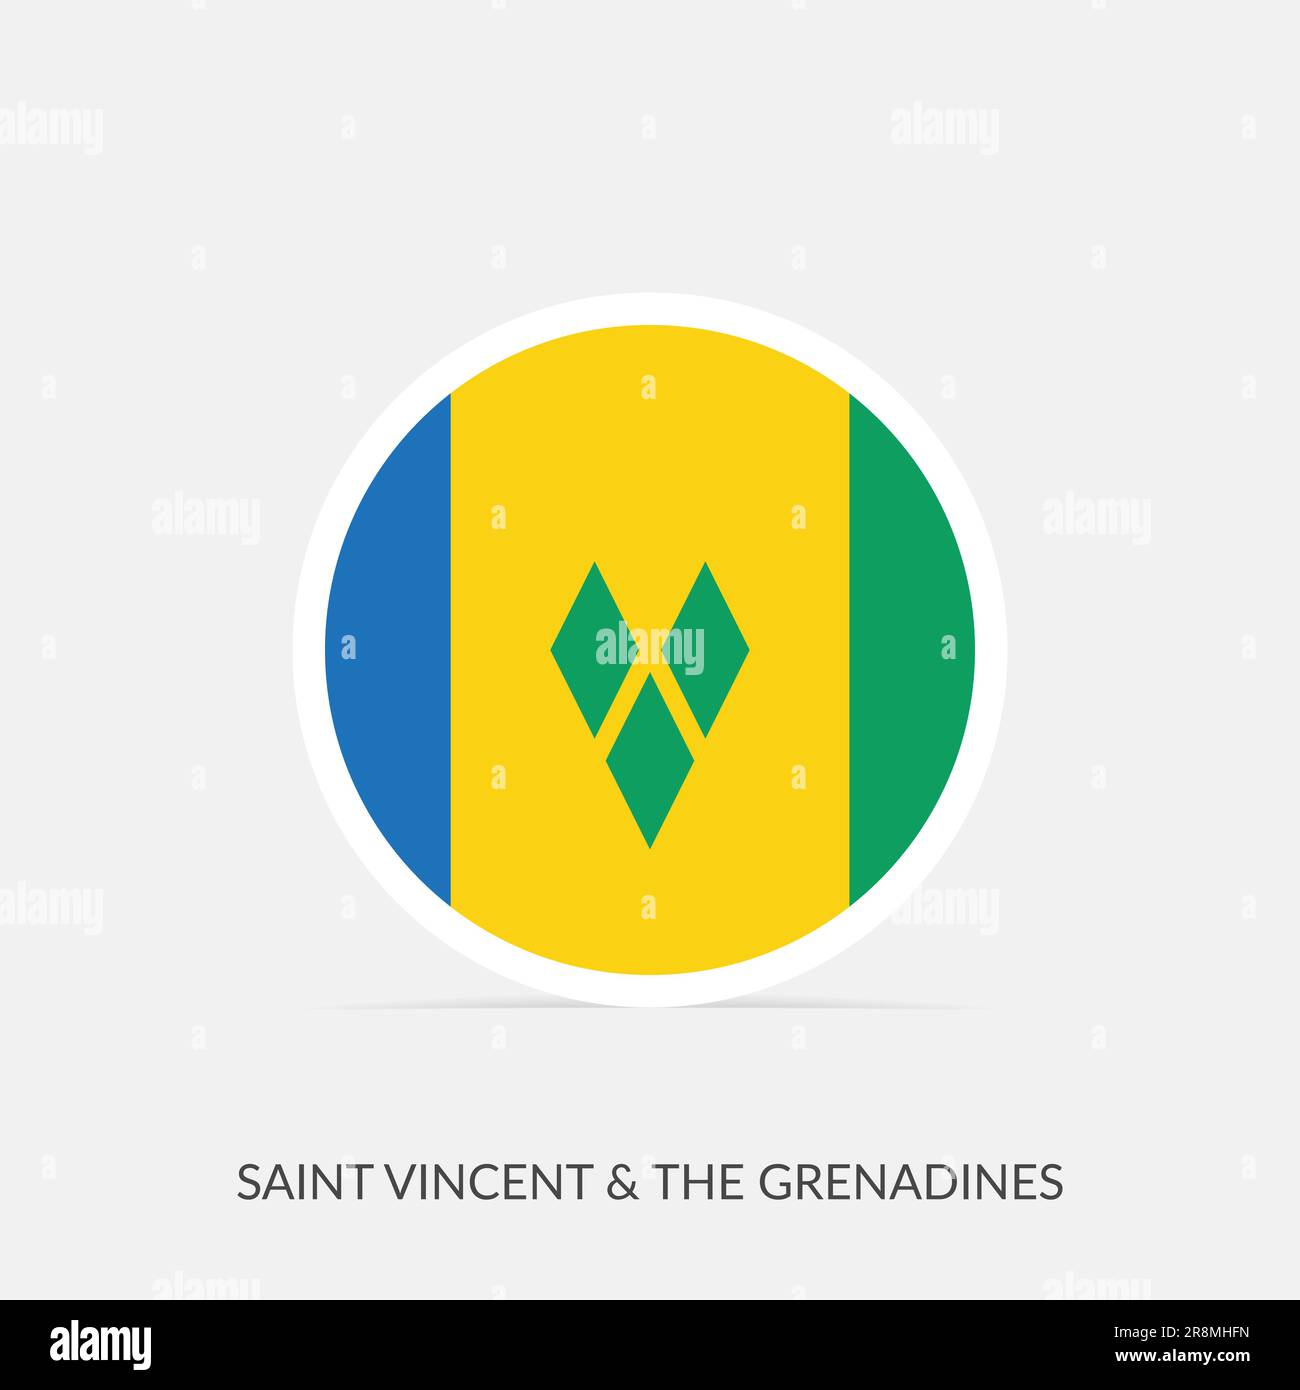 Saint Vincent & the Grenadines round flag icon with shadow. Stock Vector